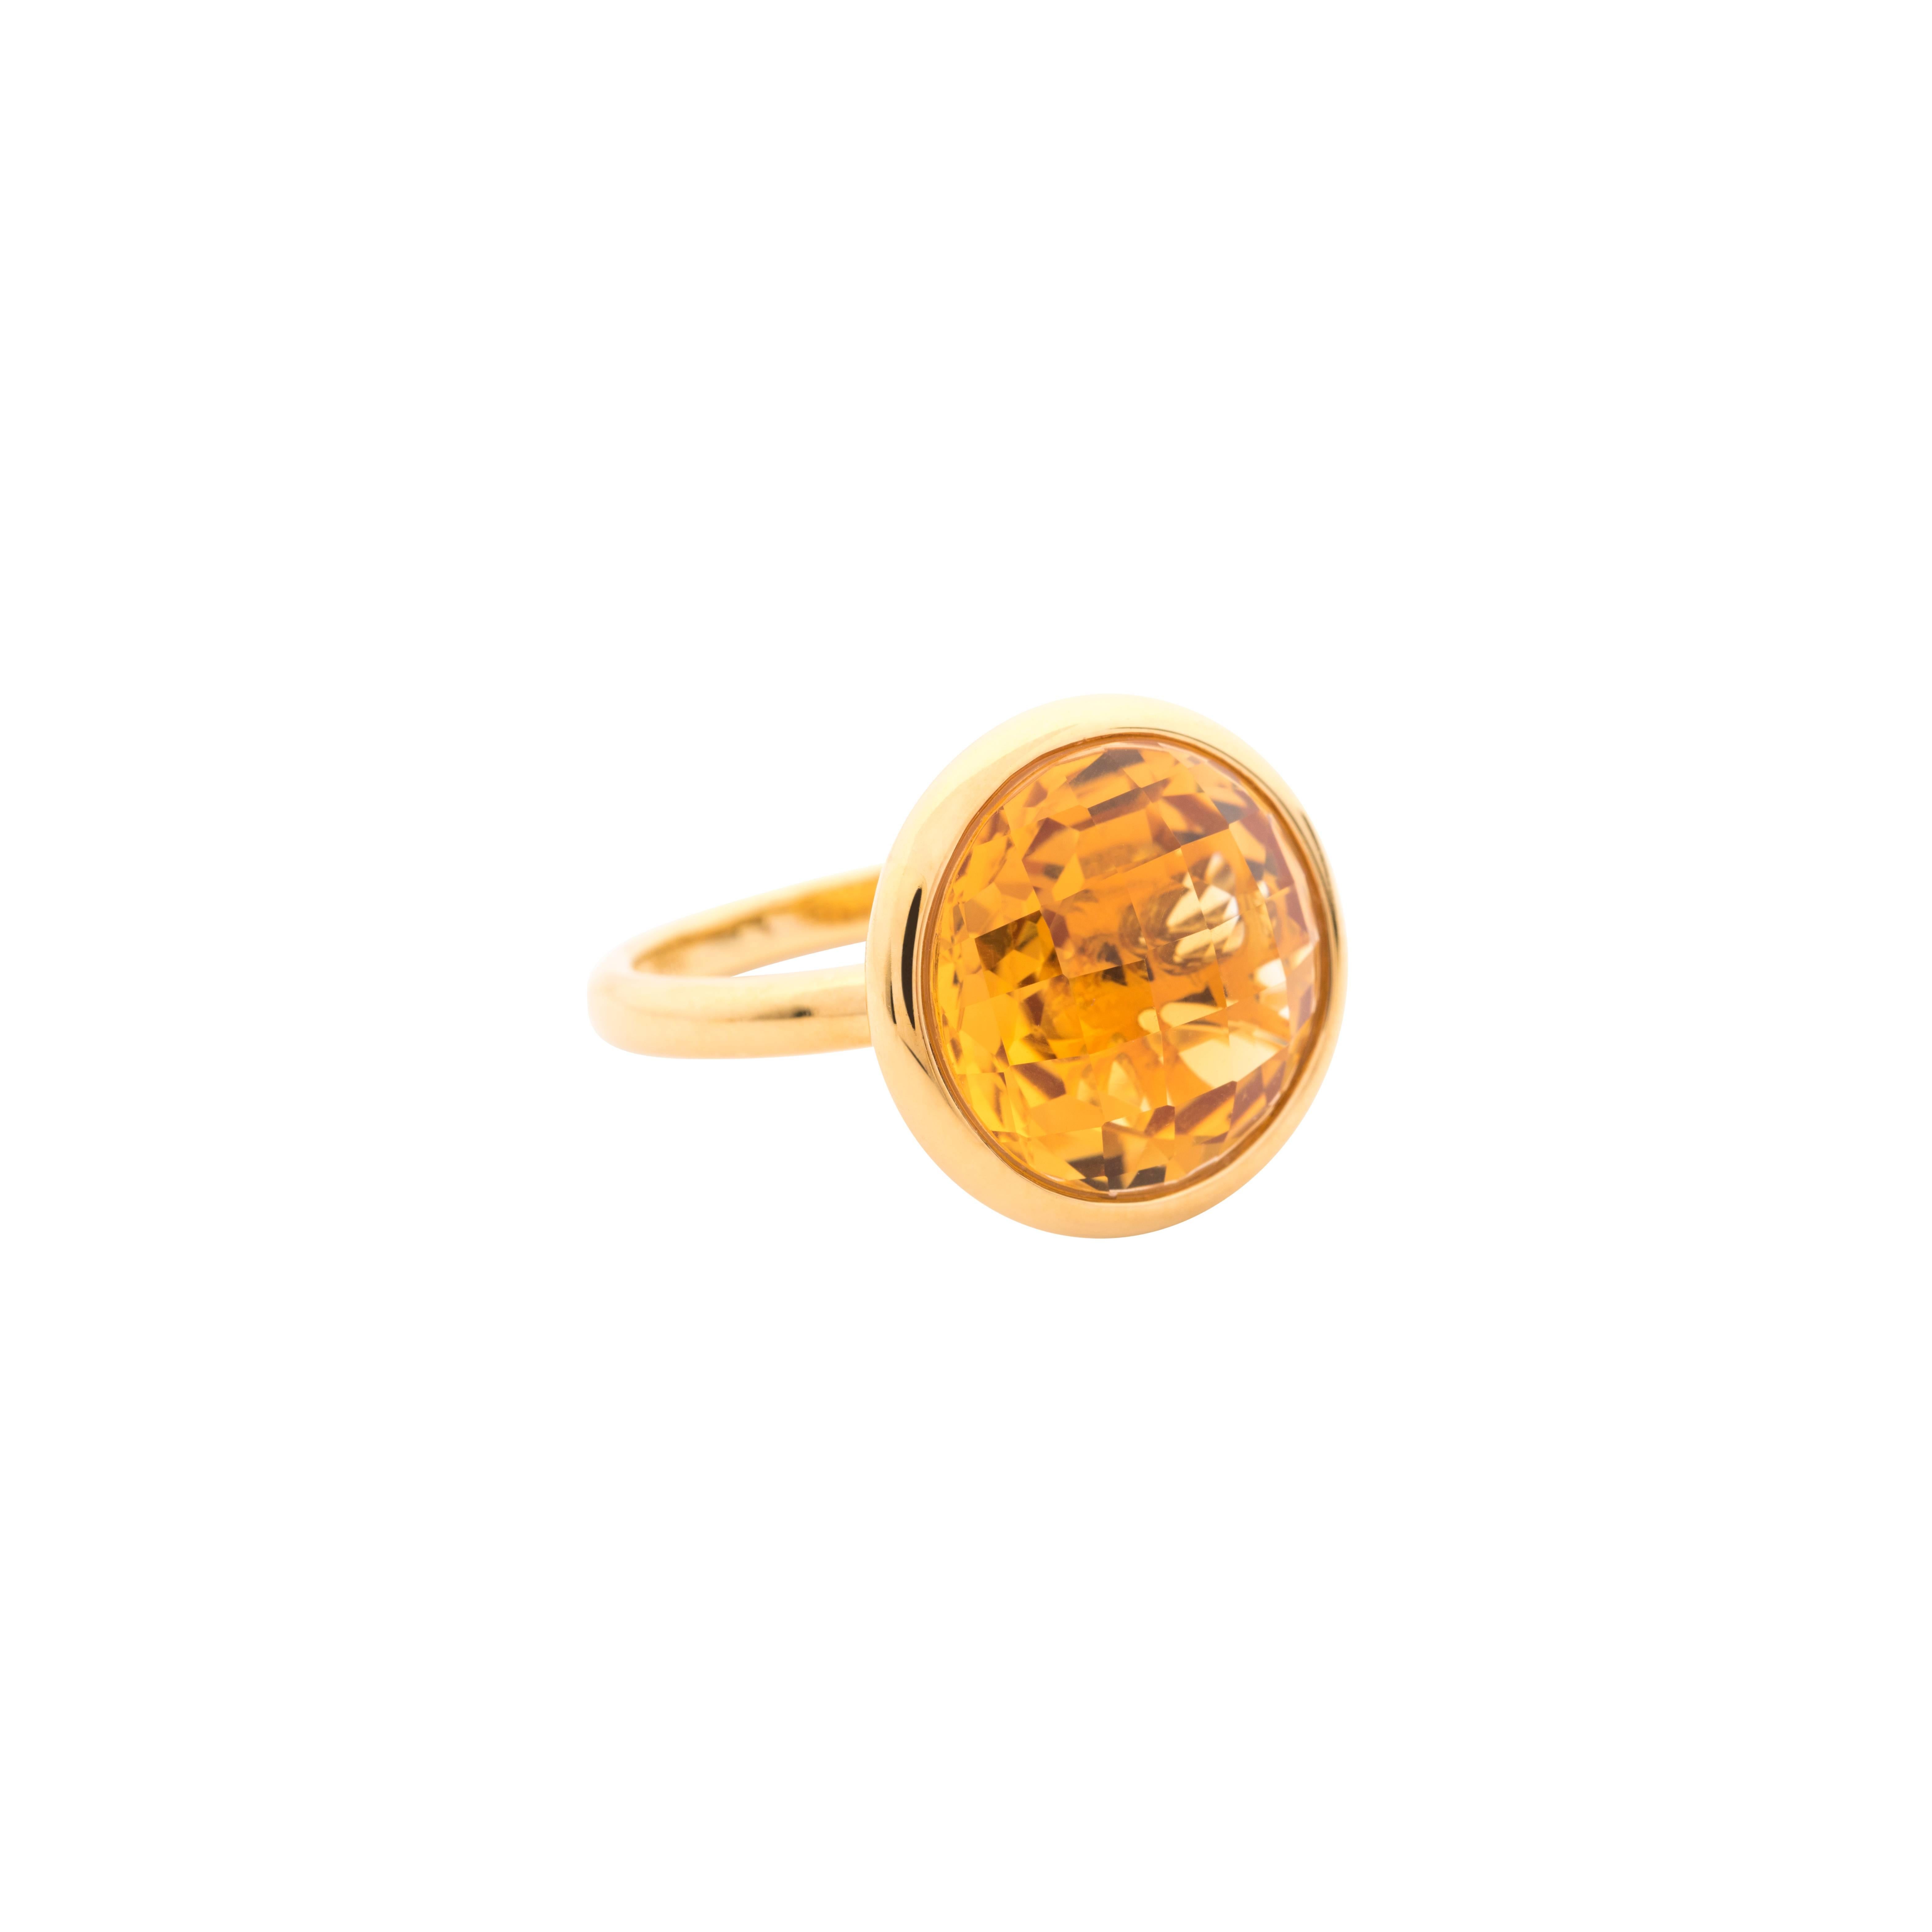 Celebrity Designer Orianne Collins 18k Yellow Gold Faceted Citrine Ring. Currently, a size 7.5 but can be sized to fit your needs.

A portion of all Orianne Collins Jewelry Sales supports Phil and Orianne Collins Little Dreams Foundation. This